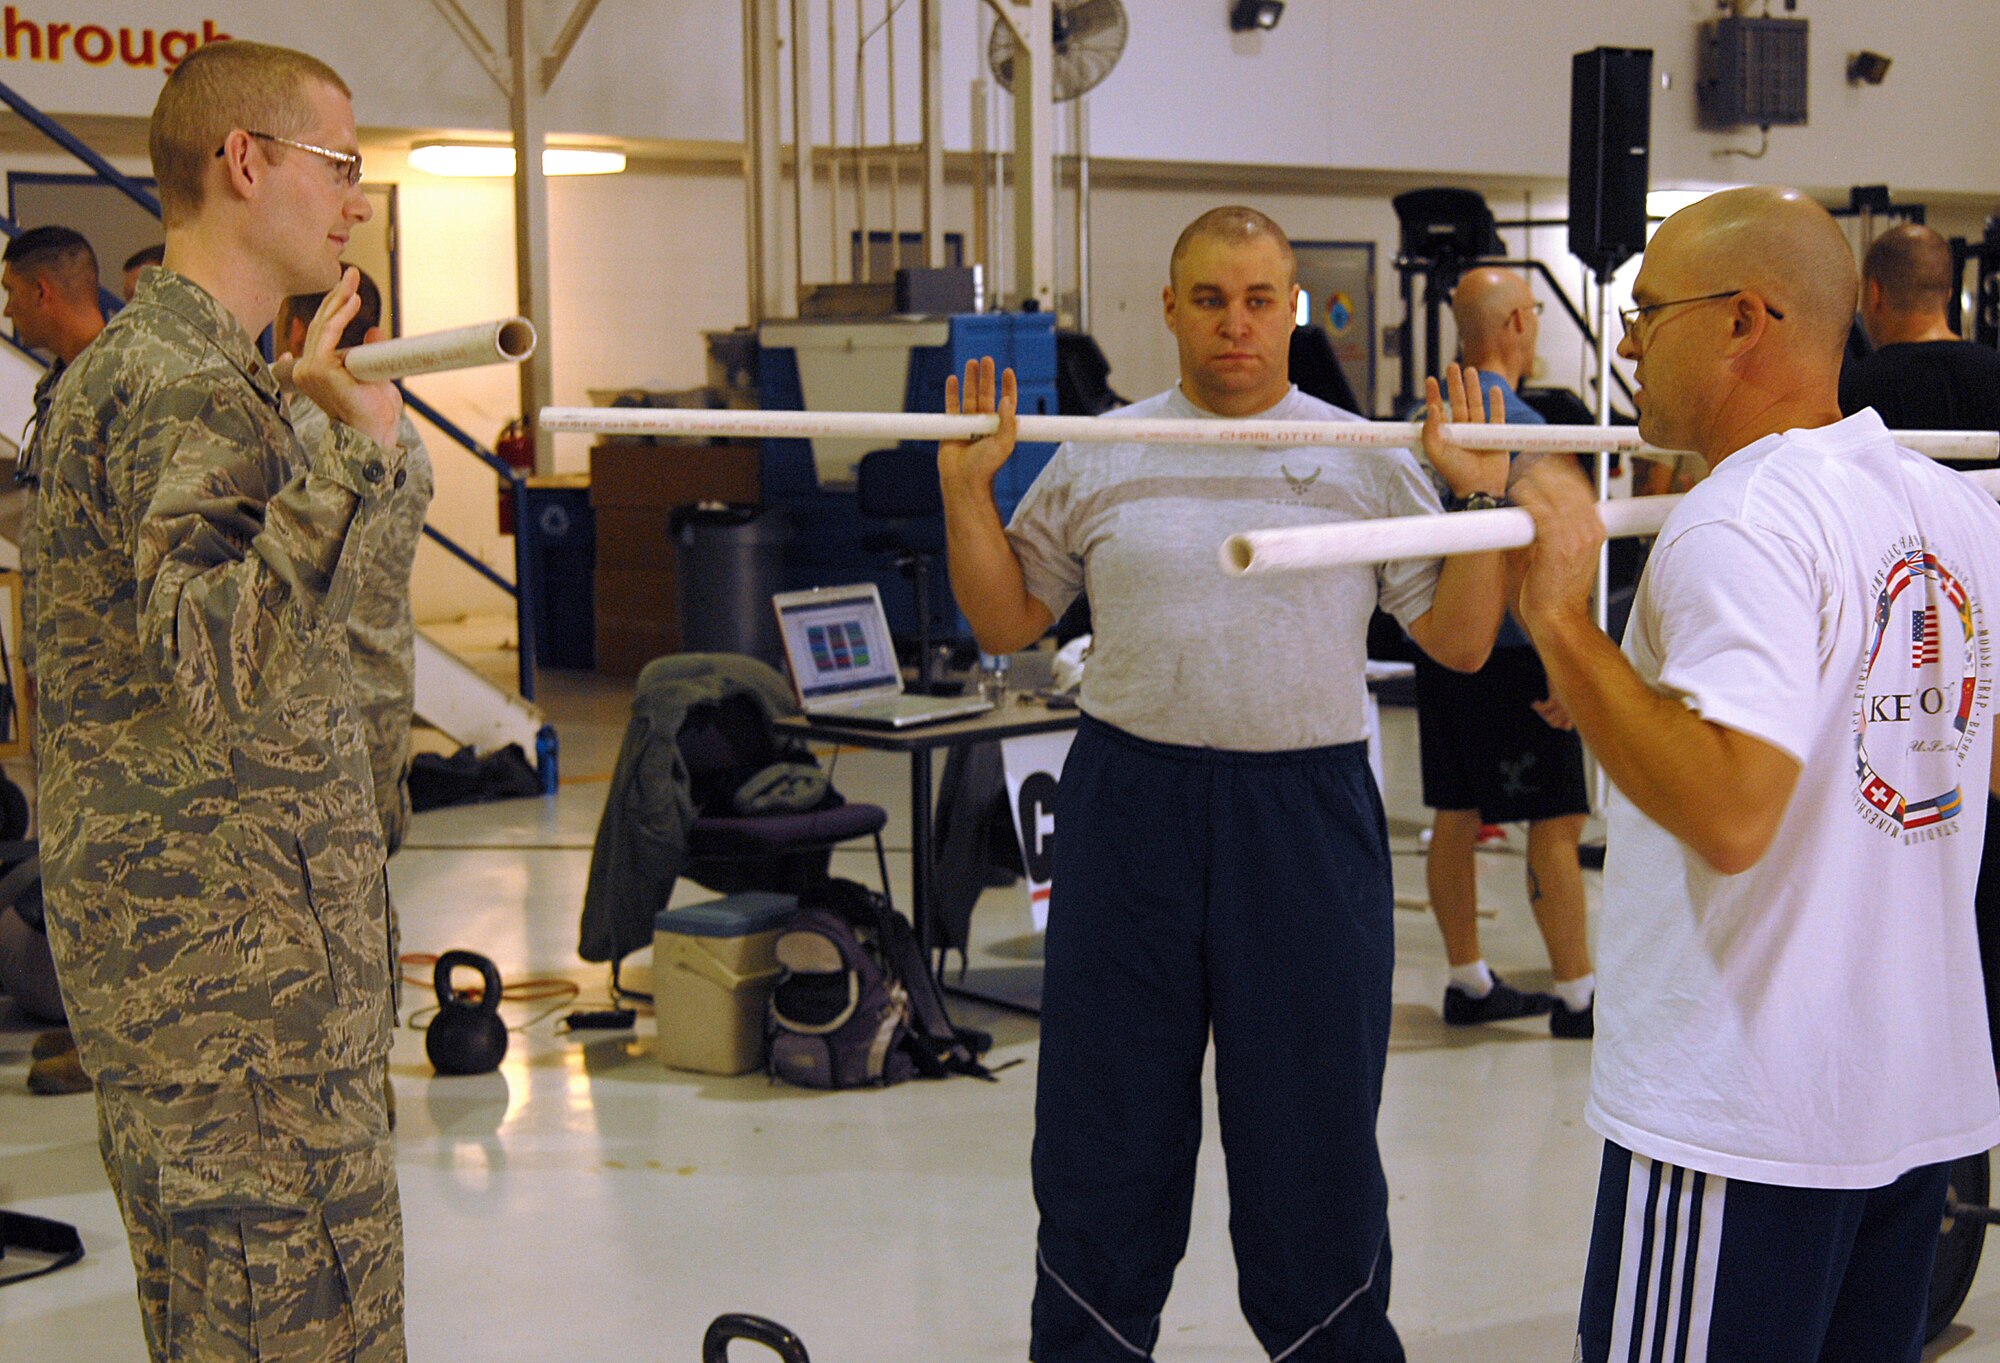 Maj. John Matuszak (r) a Cross Fit specialist, instructs 2nd Lt. Matthew Janson and Airman 1st Class Jeffrey Rhodes on a cross fit exercise at Springfield Air National Guard Base, Ohio October 13, 2012.  Matuszak was training Janson and Rhodes in Cross Fit as part of the 178th Fighter Wing fitness expo that was taking place at the base. (US Air Force Photographer MSgt Seth Skidmore/released)